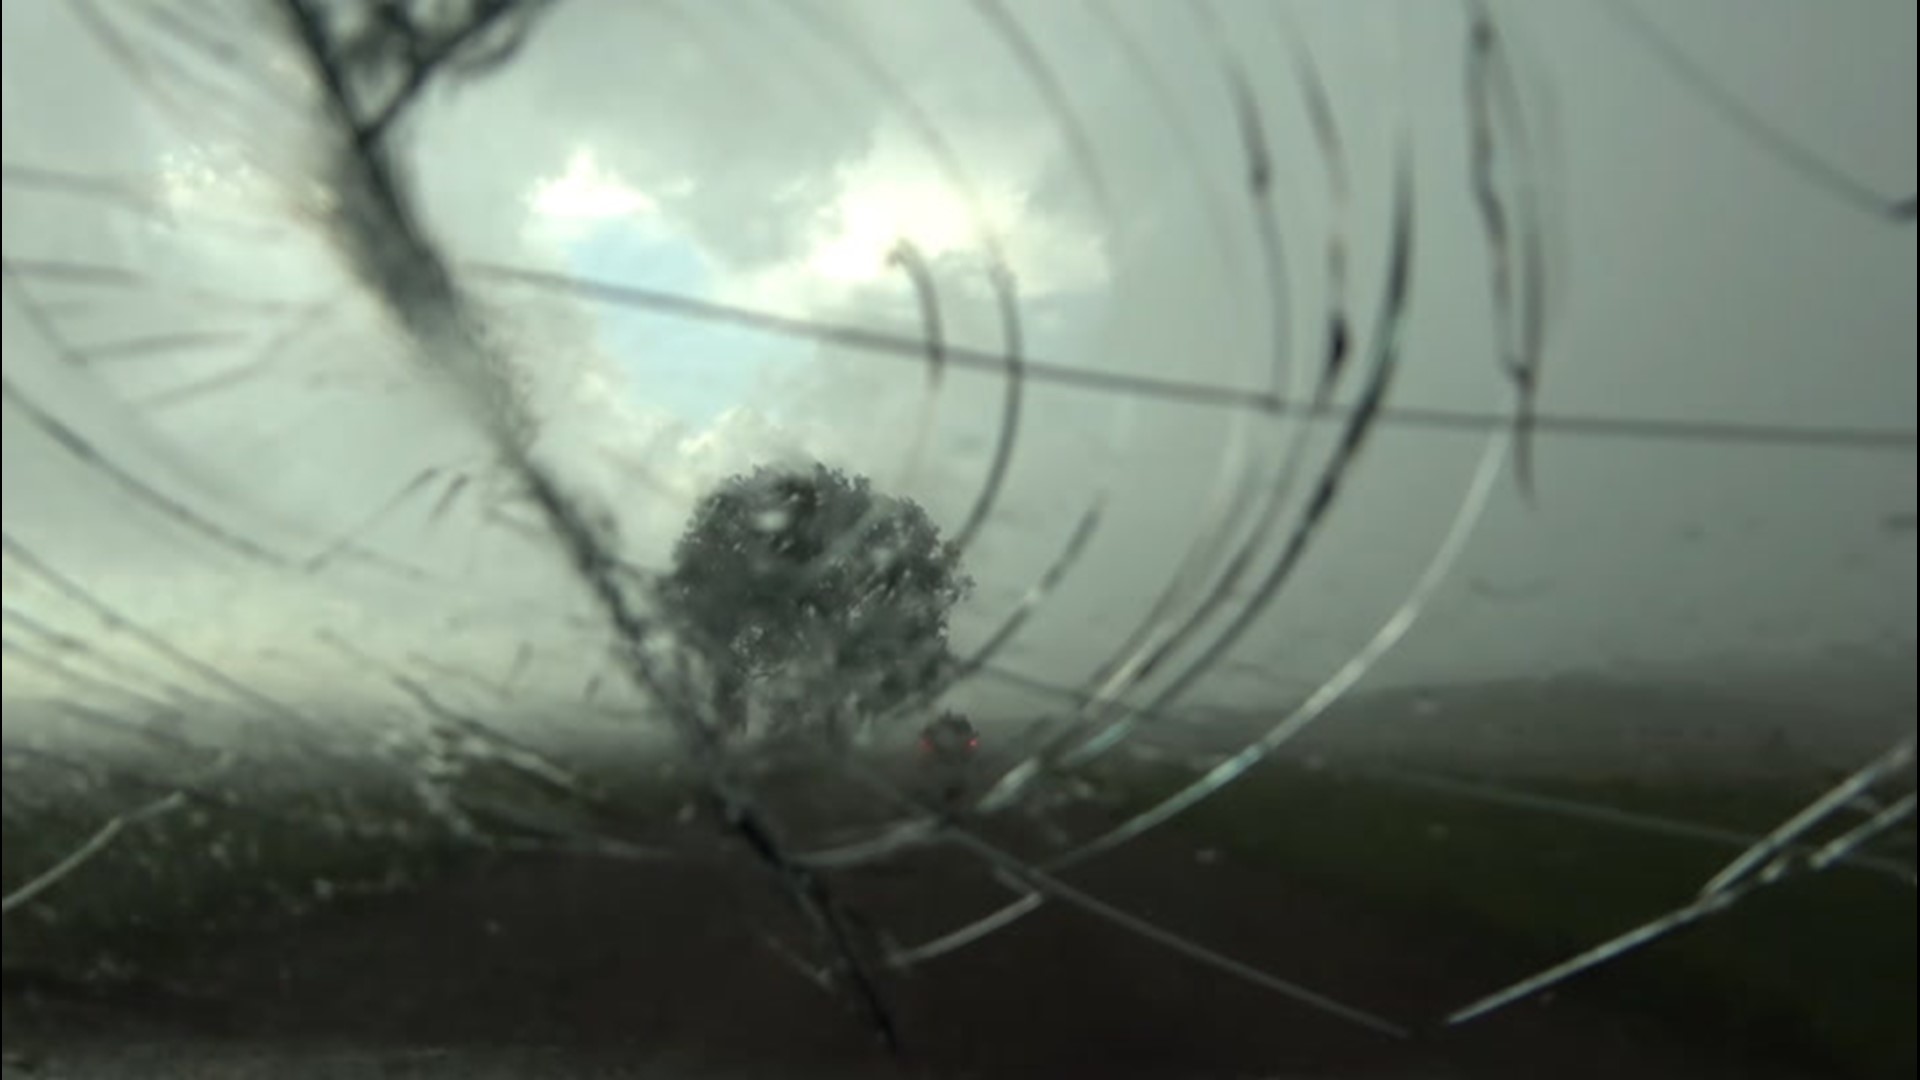 Large hail destroyed this windshield near the Wyoming and Montana border on July 6. A tornado shortly appeared in the same storm near the town of New Haven.